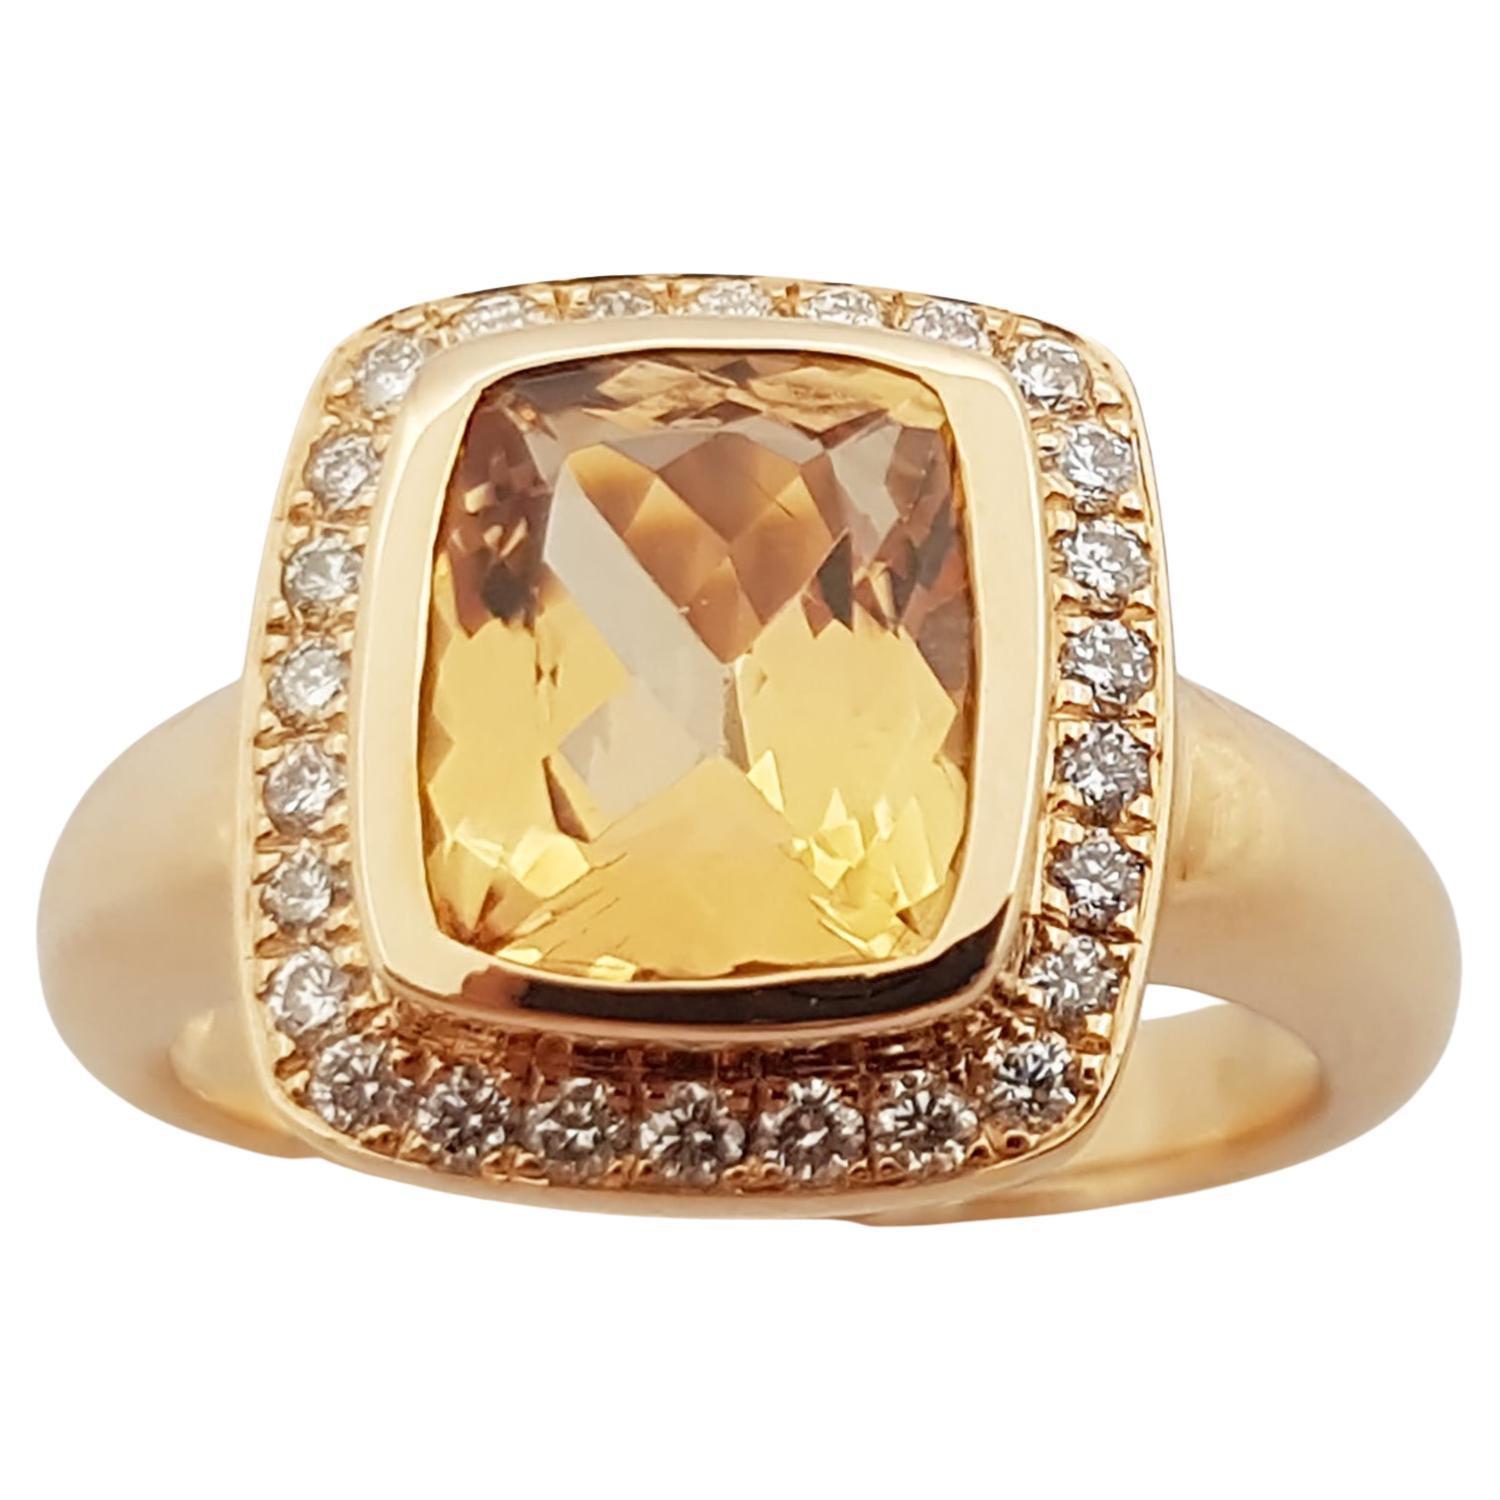 Imperial Topaz with Brown Diamond Ring Set in 18 Karat Rose Gold Settings